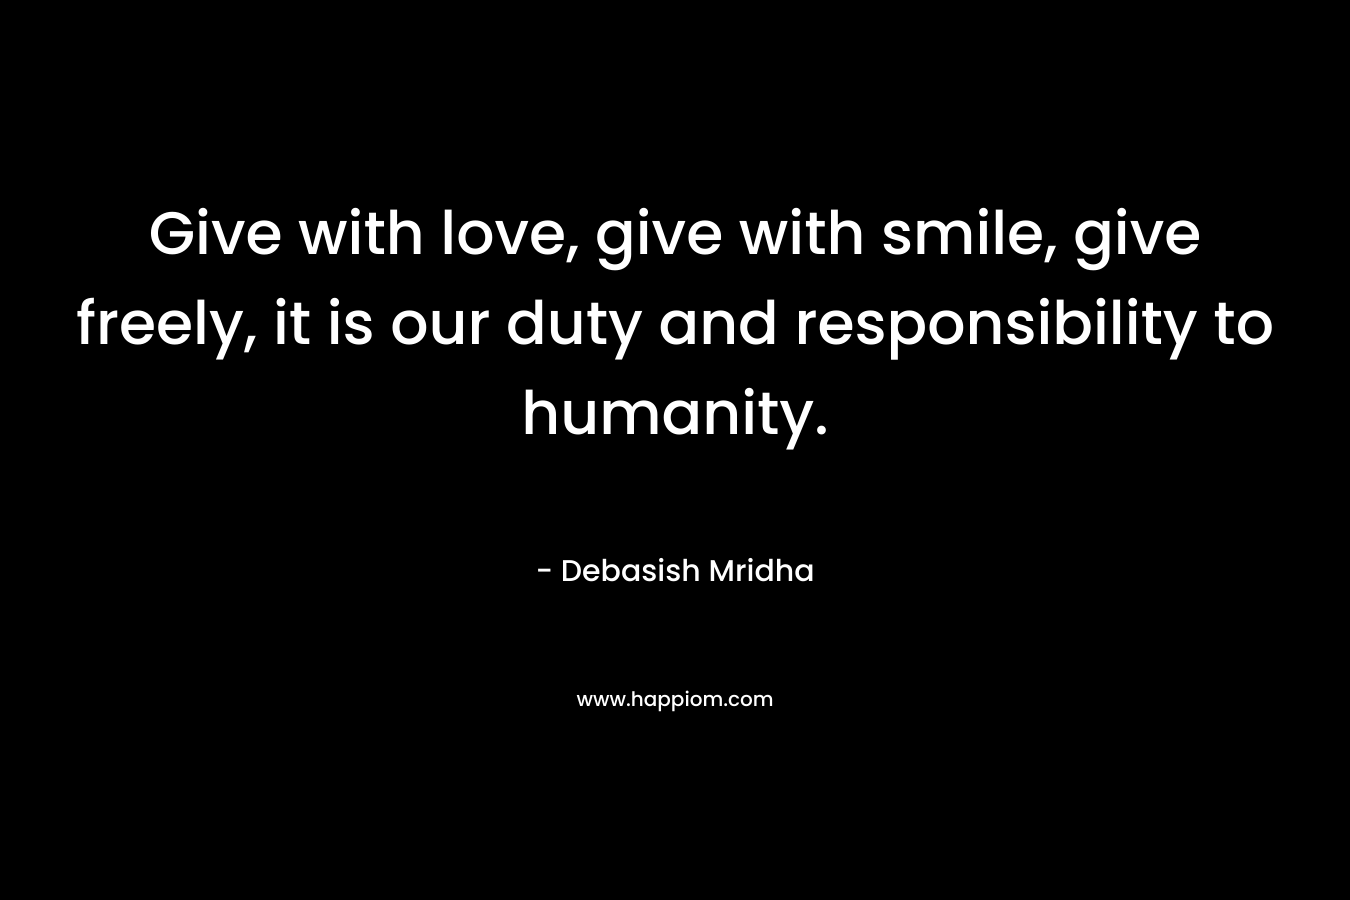 Give with love, give with smile, give freely, it is our duty and responsibility to humanity.